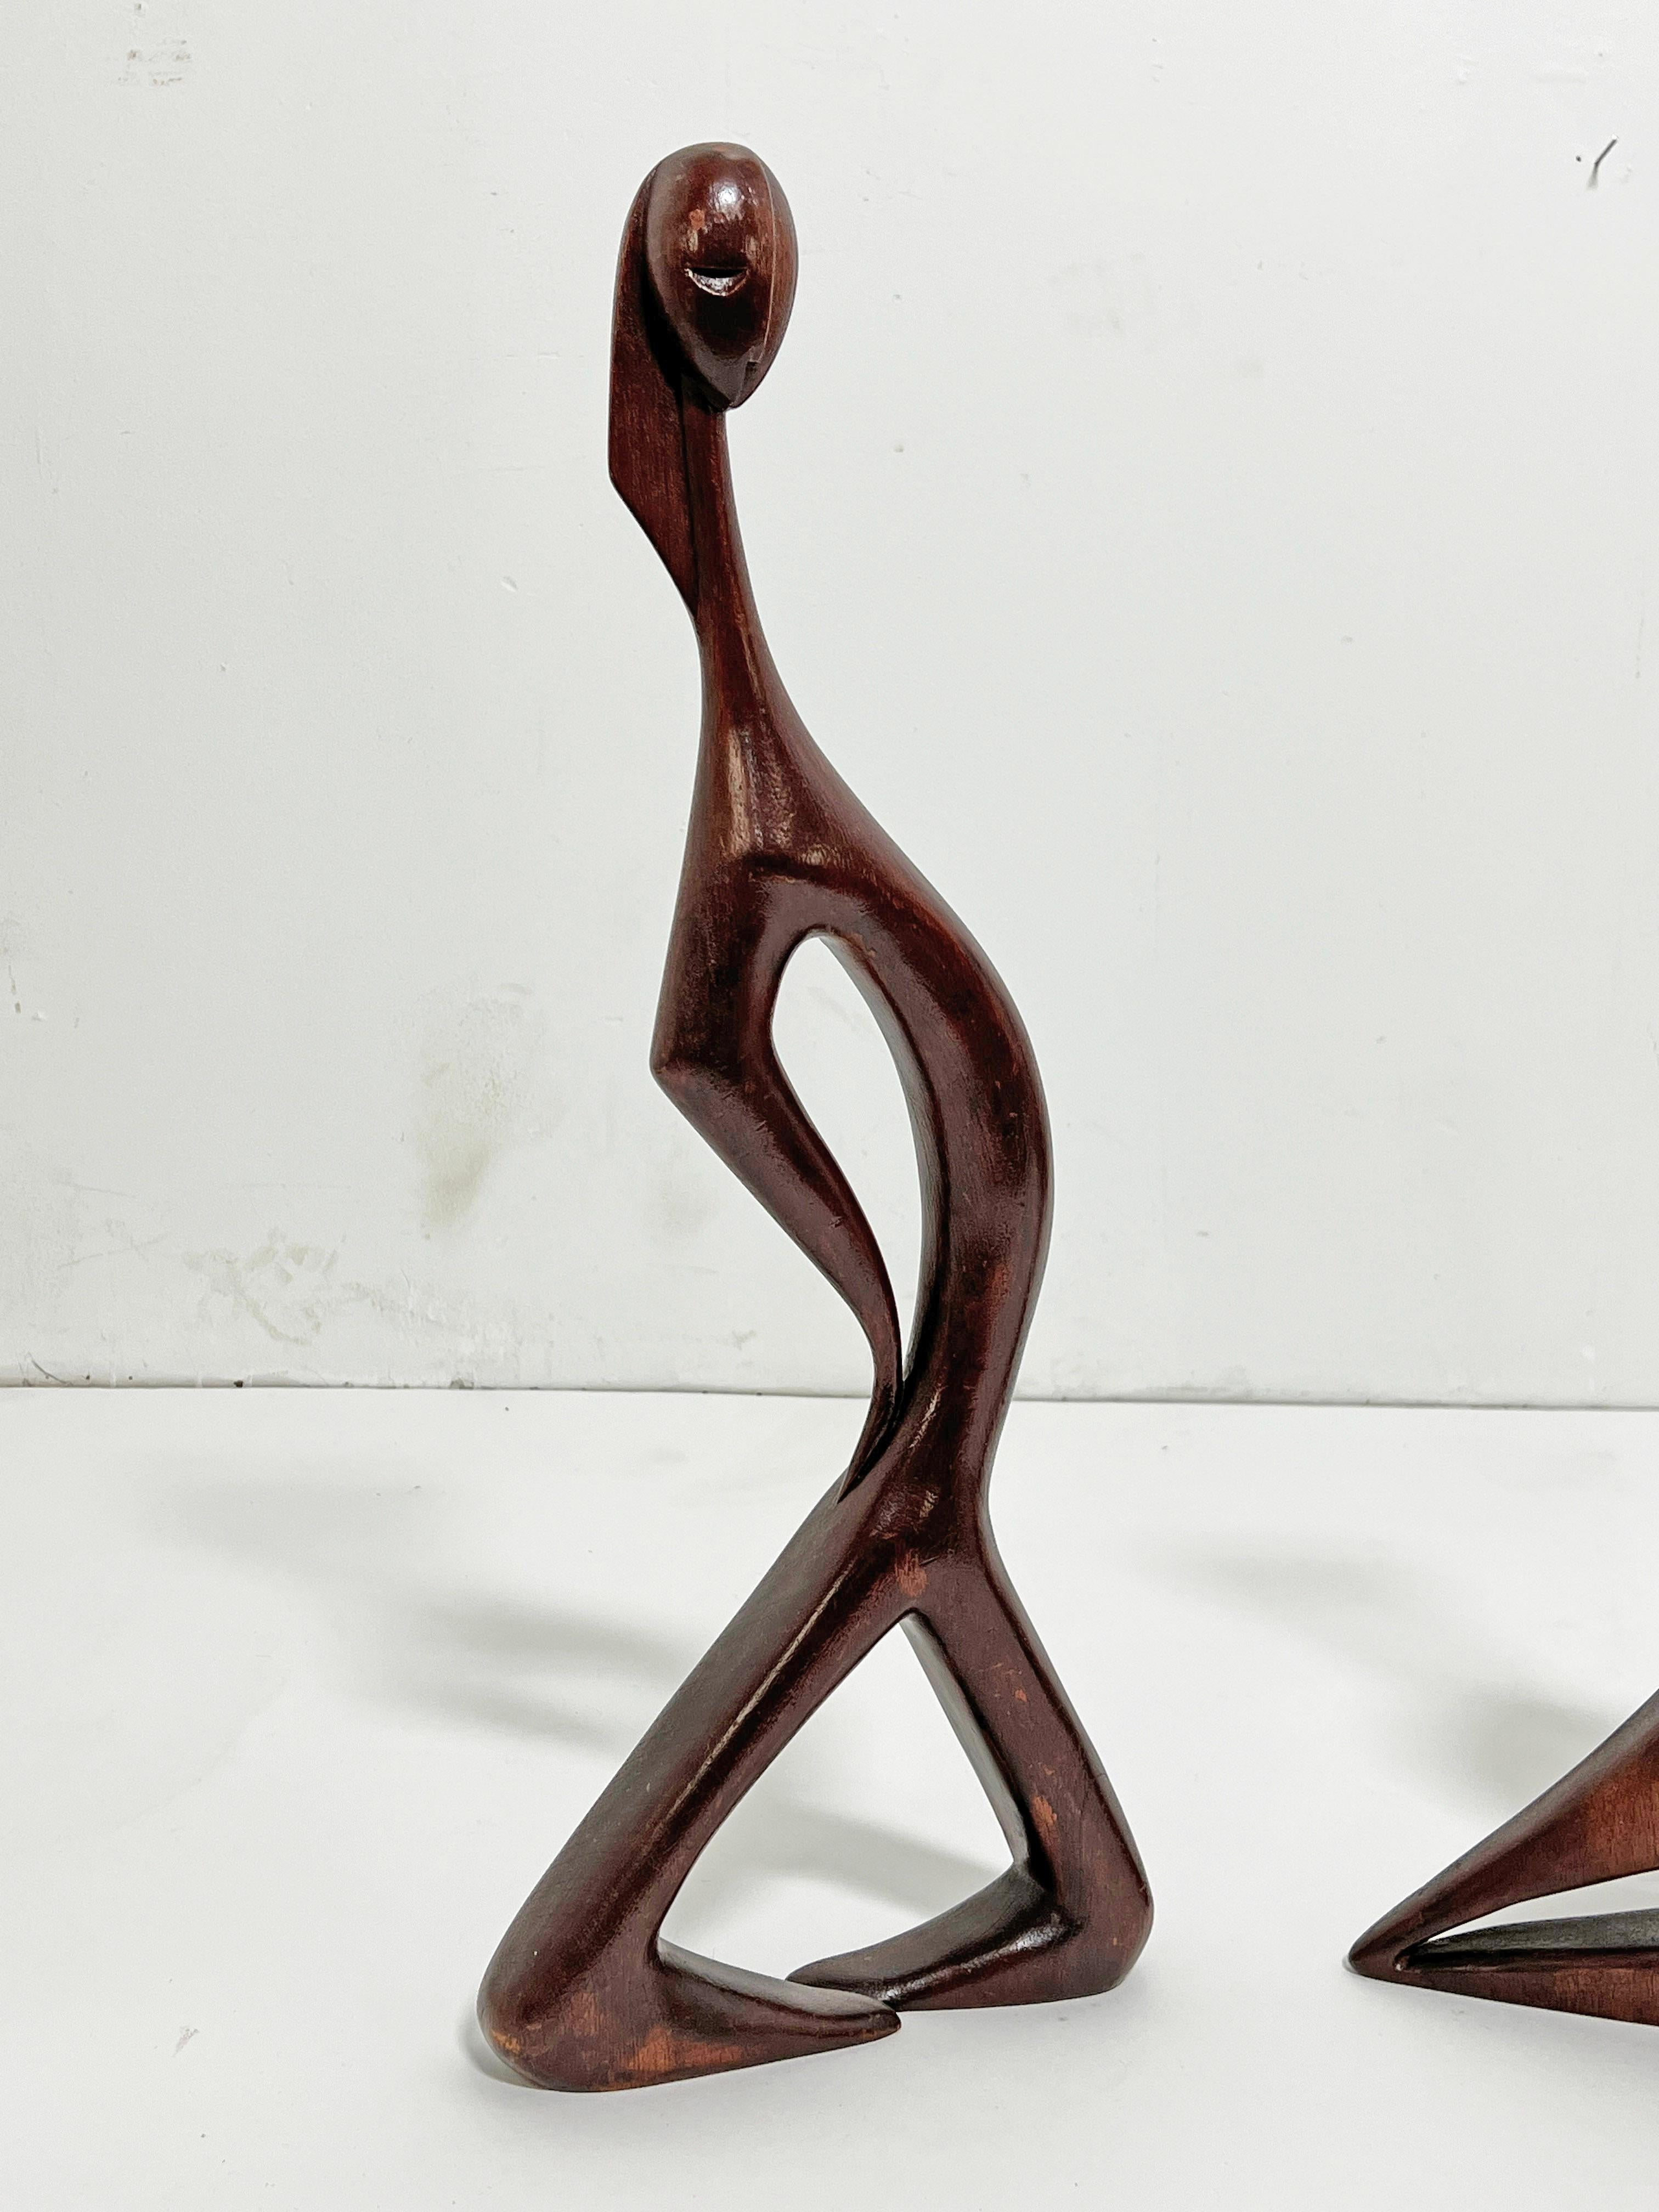  A rare pair of carved mahogany abstract figures circa mid-1950s by the modernist jeweler and painter Stella Popowski (1931-2008). Popowski was active in both Los Angeles and San Francisco, California and an important figure in the modernist jewelry